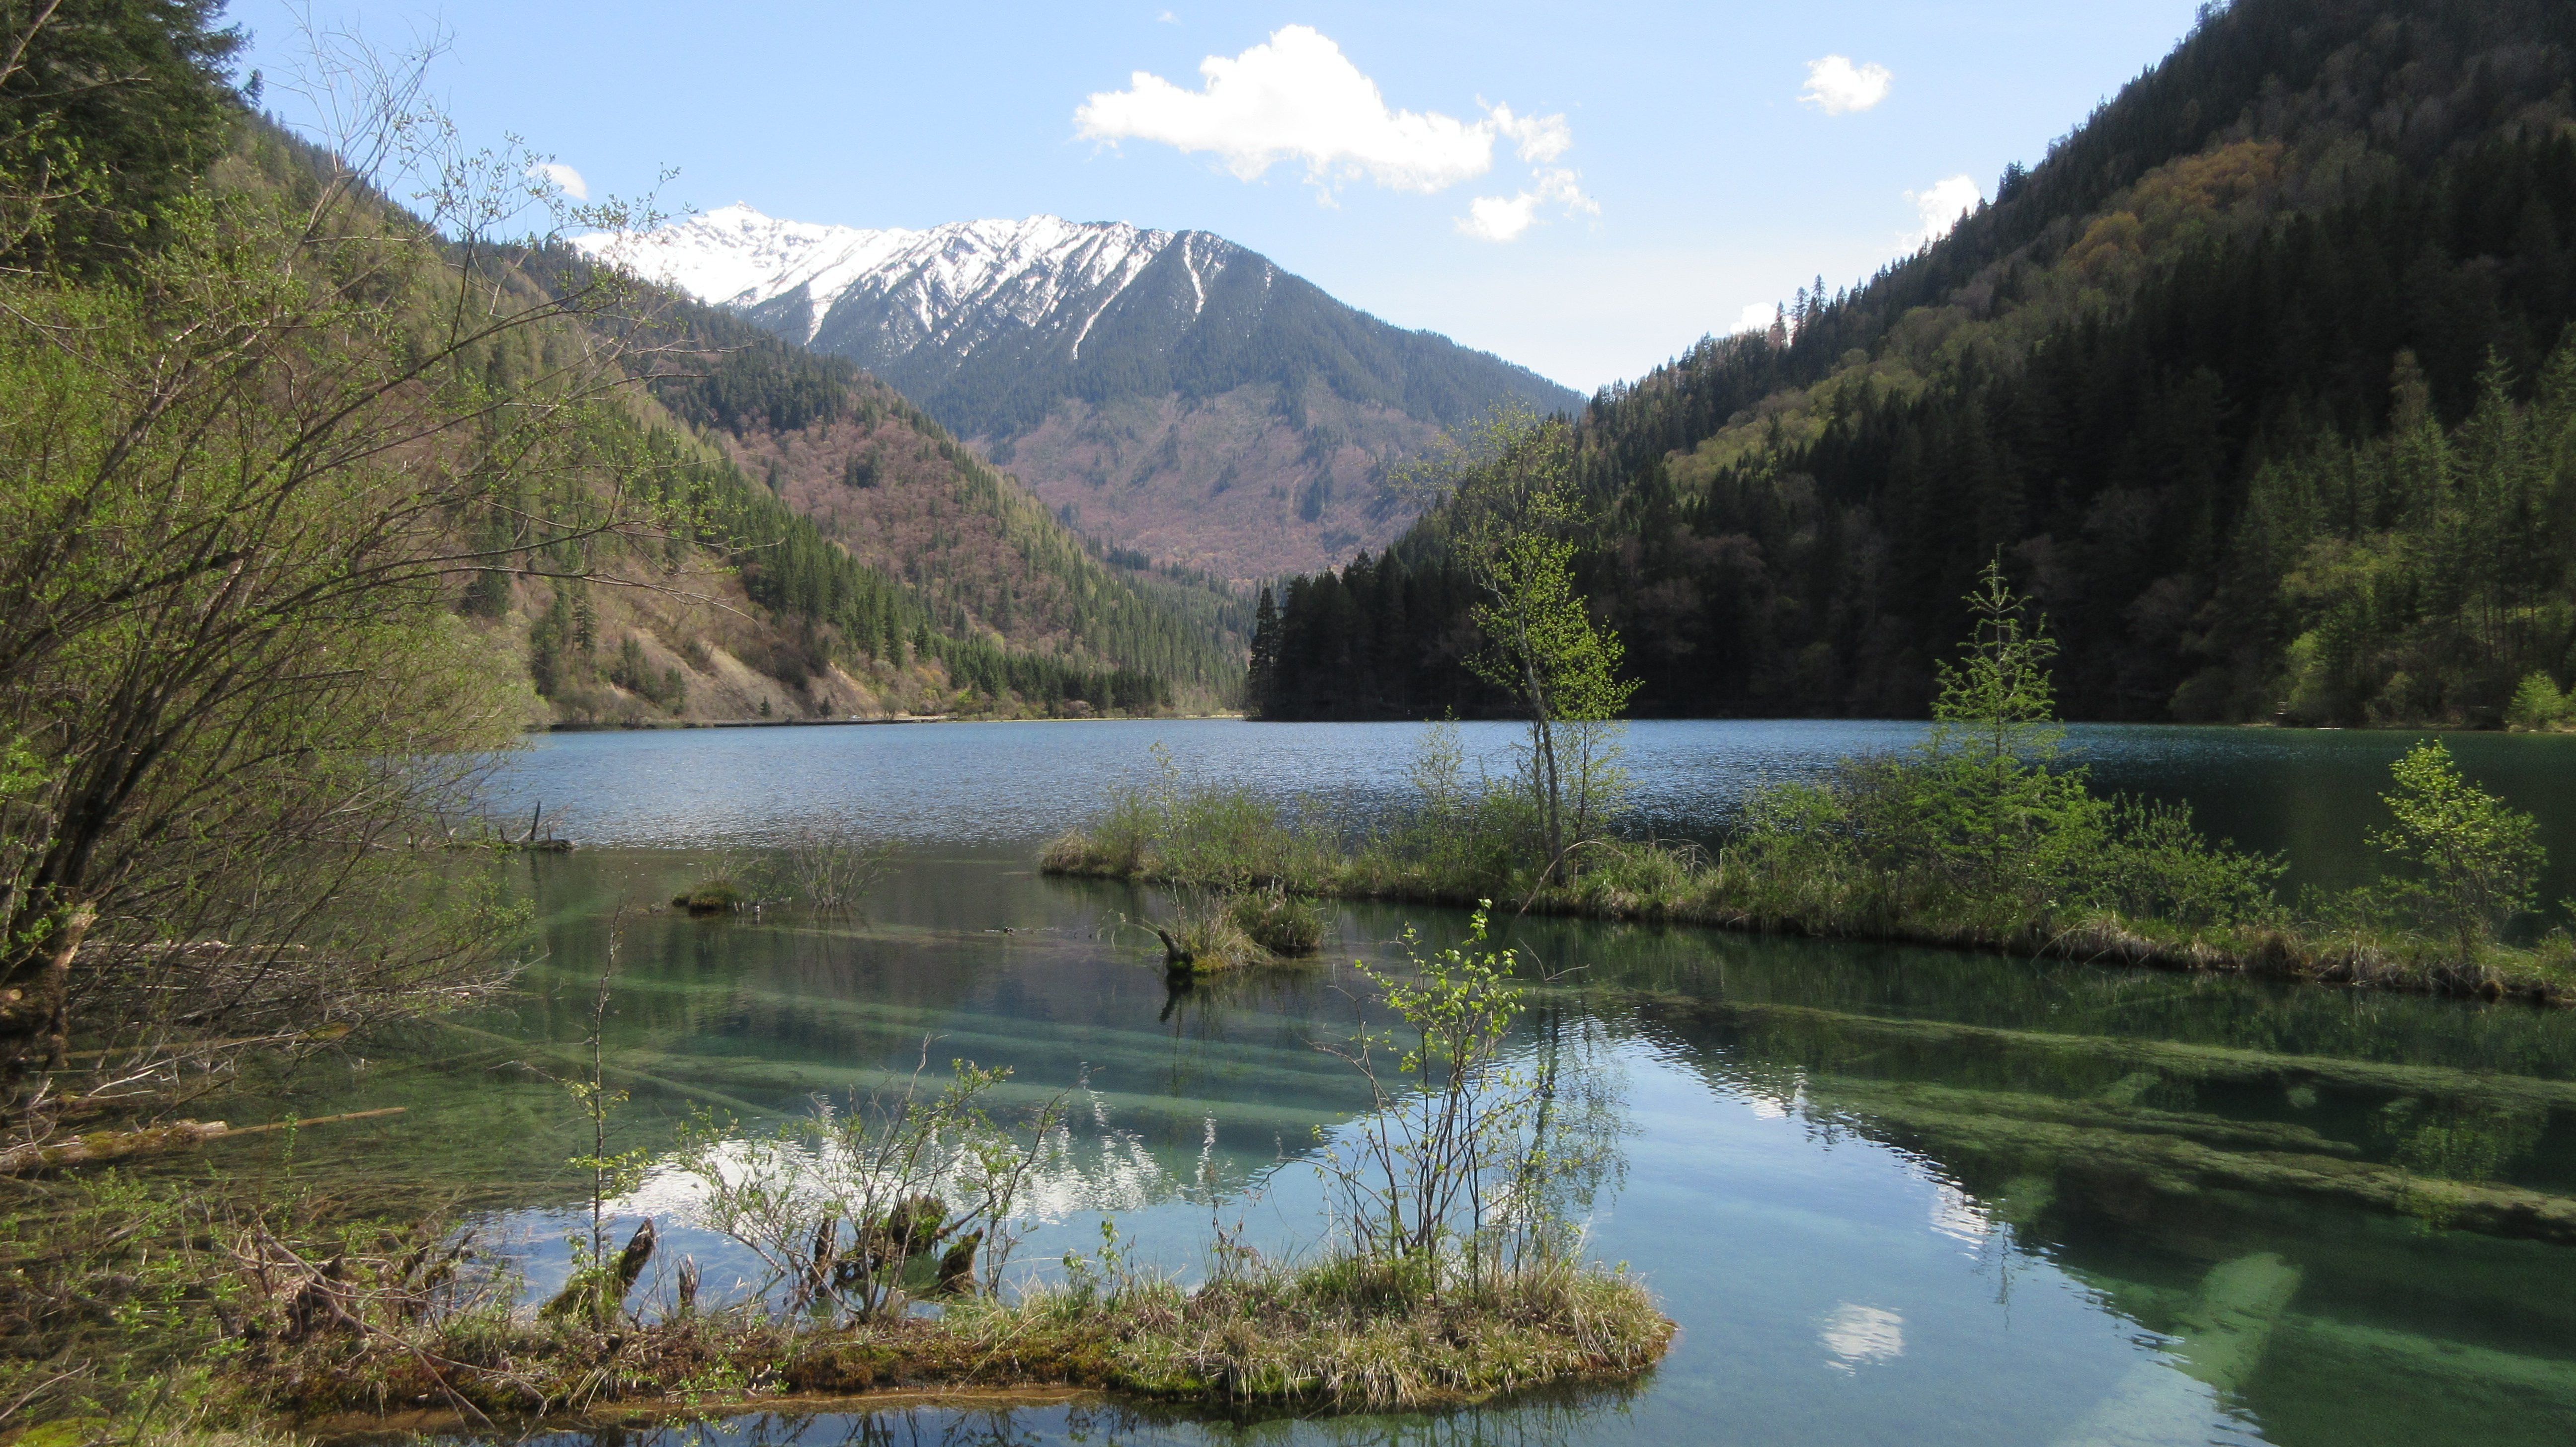 REFLECTIONS. The lakes of Jiuzhaigou are often mirror-like, creating a reflection of the surrounding landscape at the right time of day and weather. 